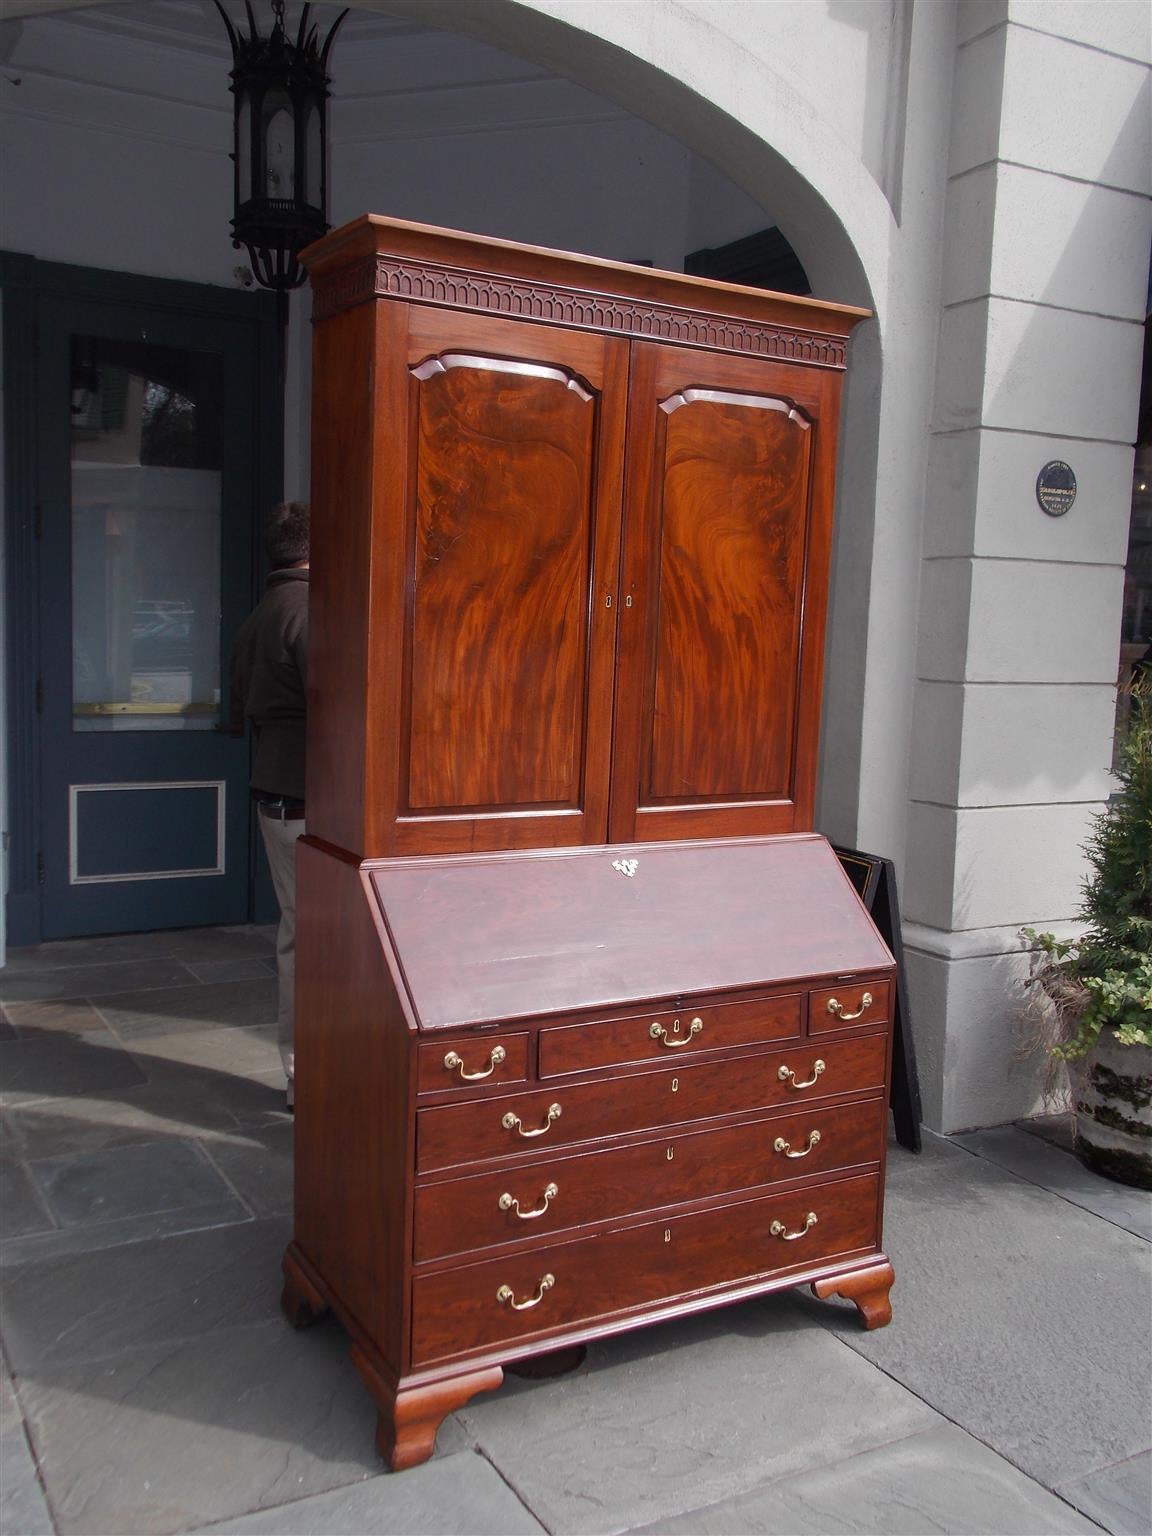 English Chippendale mahogany blind door secretary with bookcase.  Upper case has a carved cornice fret work with flanking blind doors concealing interior adjustable shelving.  Lower case has a slant front desk with fitted interior drawers, pigeon